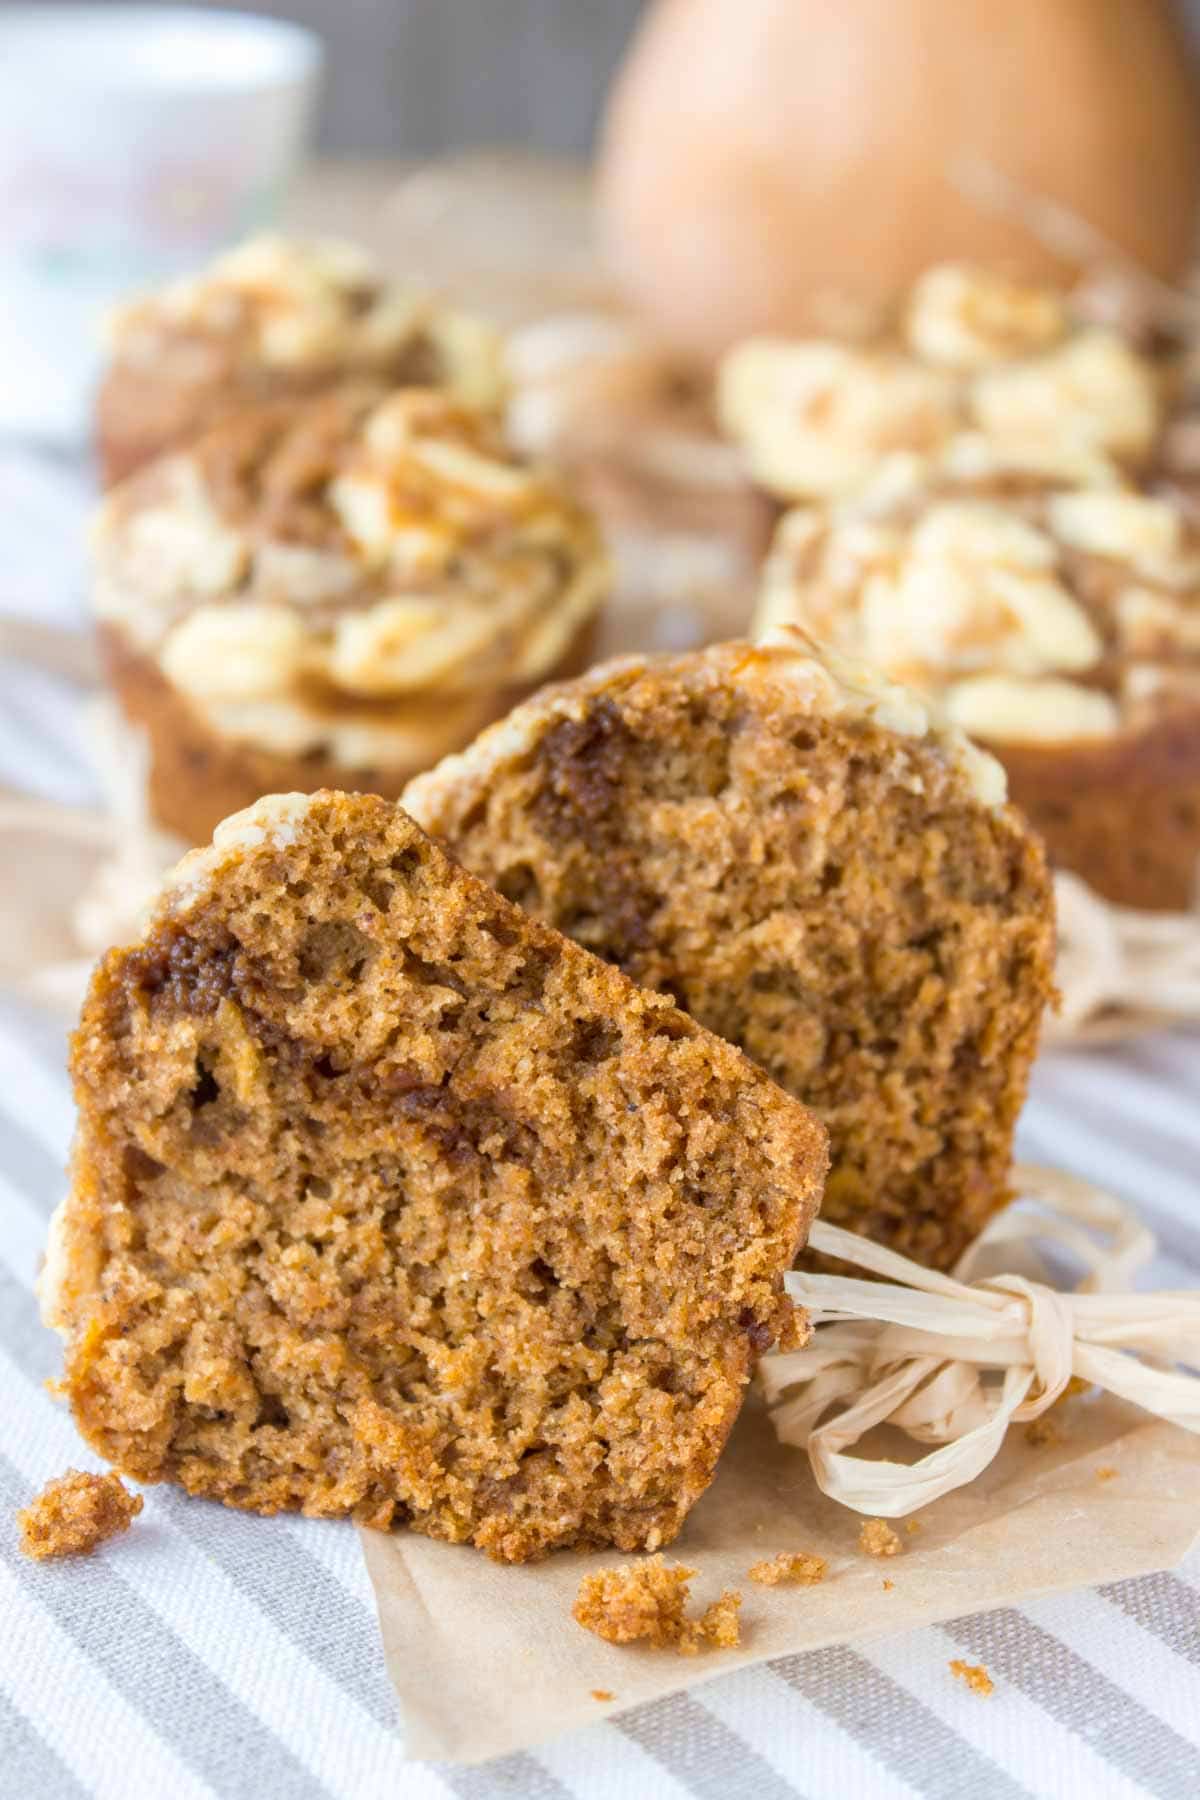 Fragrant, soft and lusciously sweet, Pumpkin Cheesecake Muffins made with all HEALTHY ingredients, refined sugar-free are the best thing this Fall. Flavored with real pumpkin and warm spices, filled with a cream cheese surprise it's a dessert that will make you wish pumpkin season last all year long. #pumpkin #fall #muffin #healthy #wholegrain #skinny #lowsugar #lowfat #easy #kidsfriendly #school #breakfast #dessert | natalieshealth.com